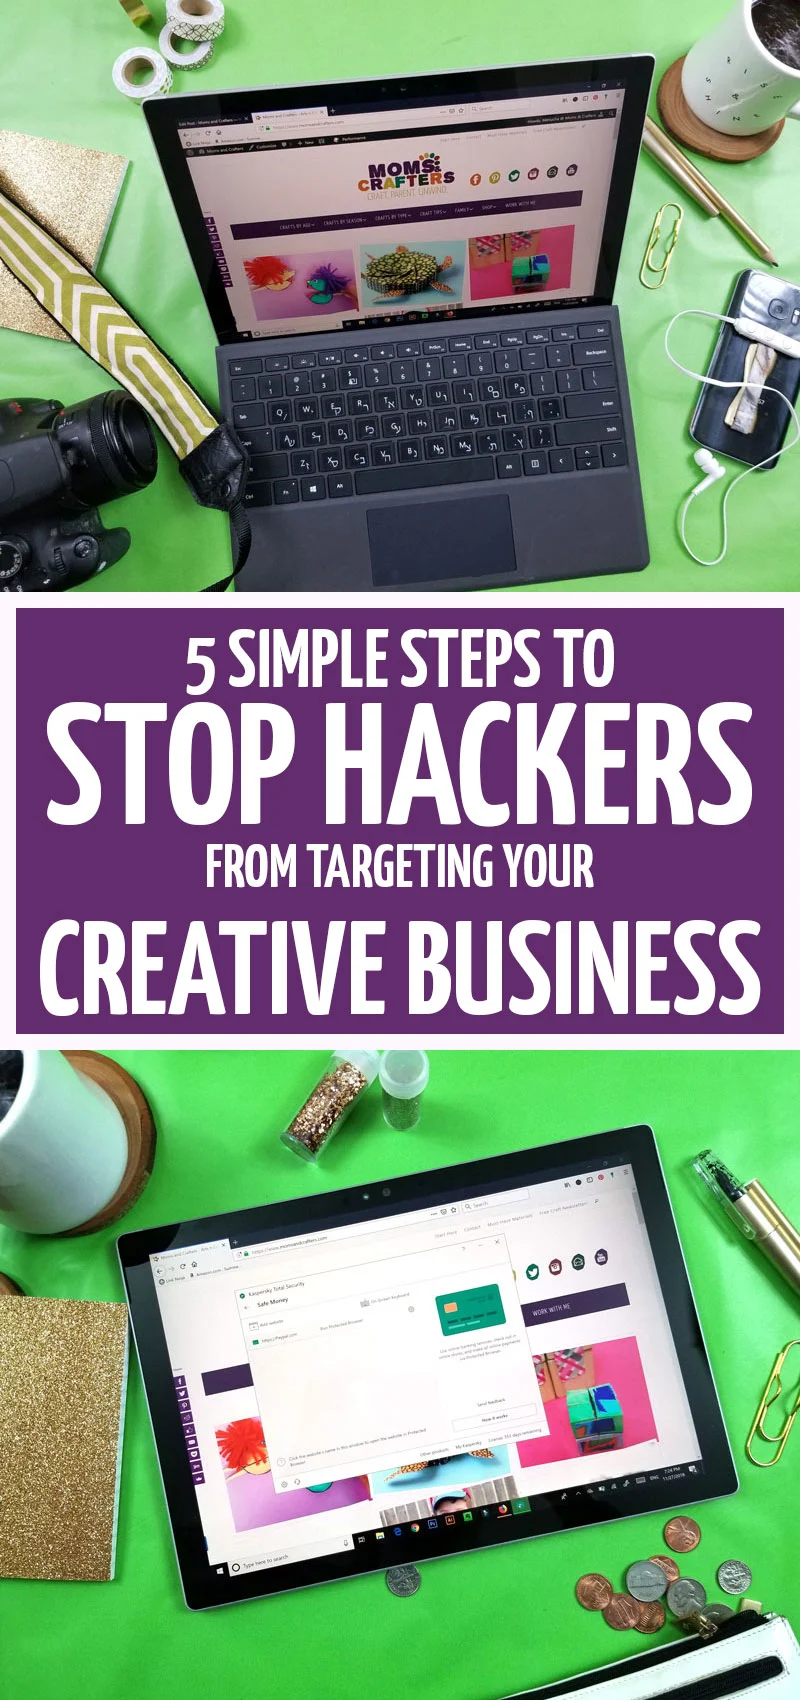 Click to learn how to stop hackers if you're a small business owner, craft seller, or other creative! This tips for selling crafts help you with digital security and are great tips for craft bloggers too! #smallbusiness #craftblogger #security